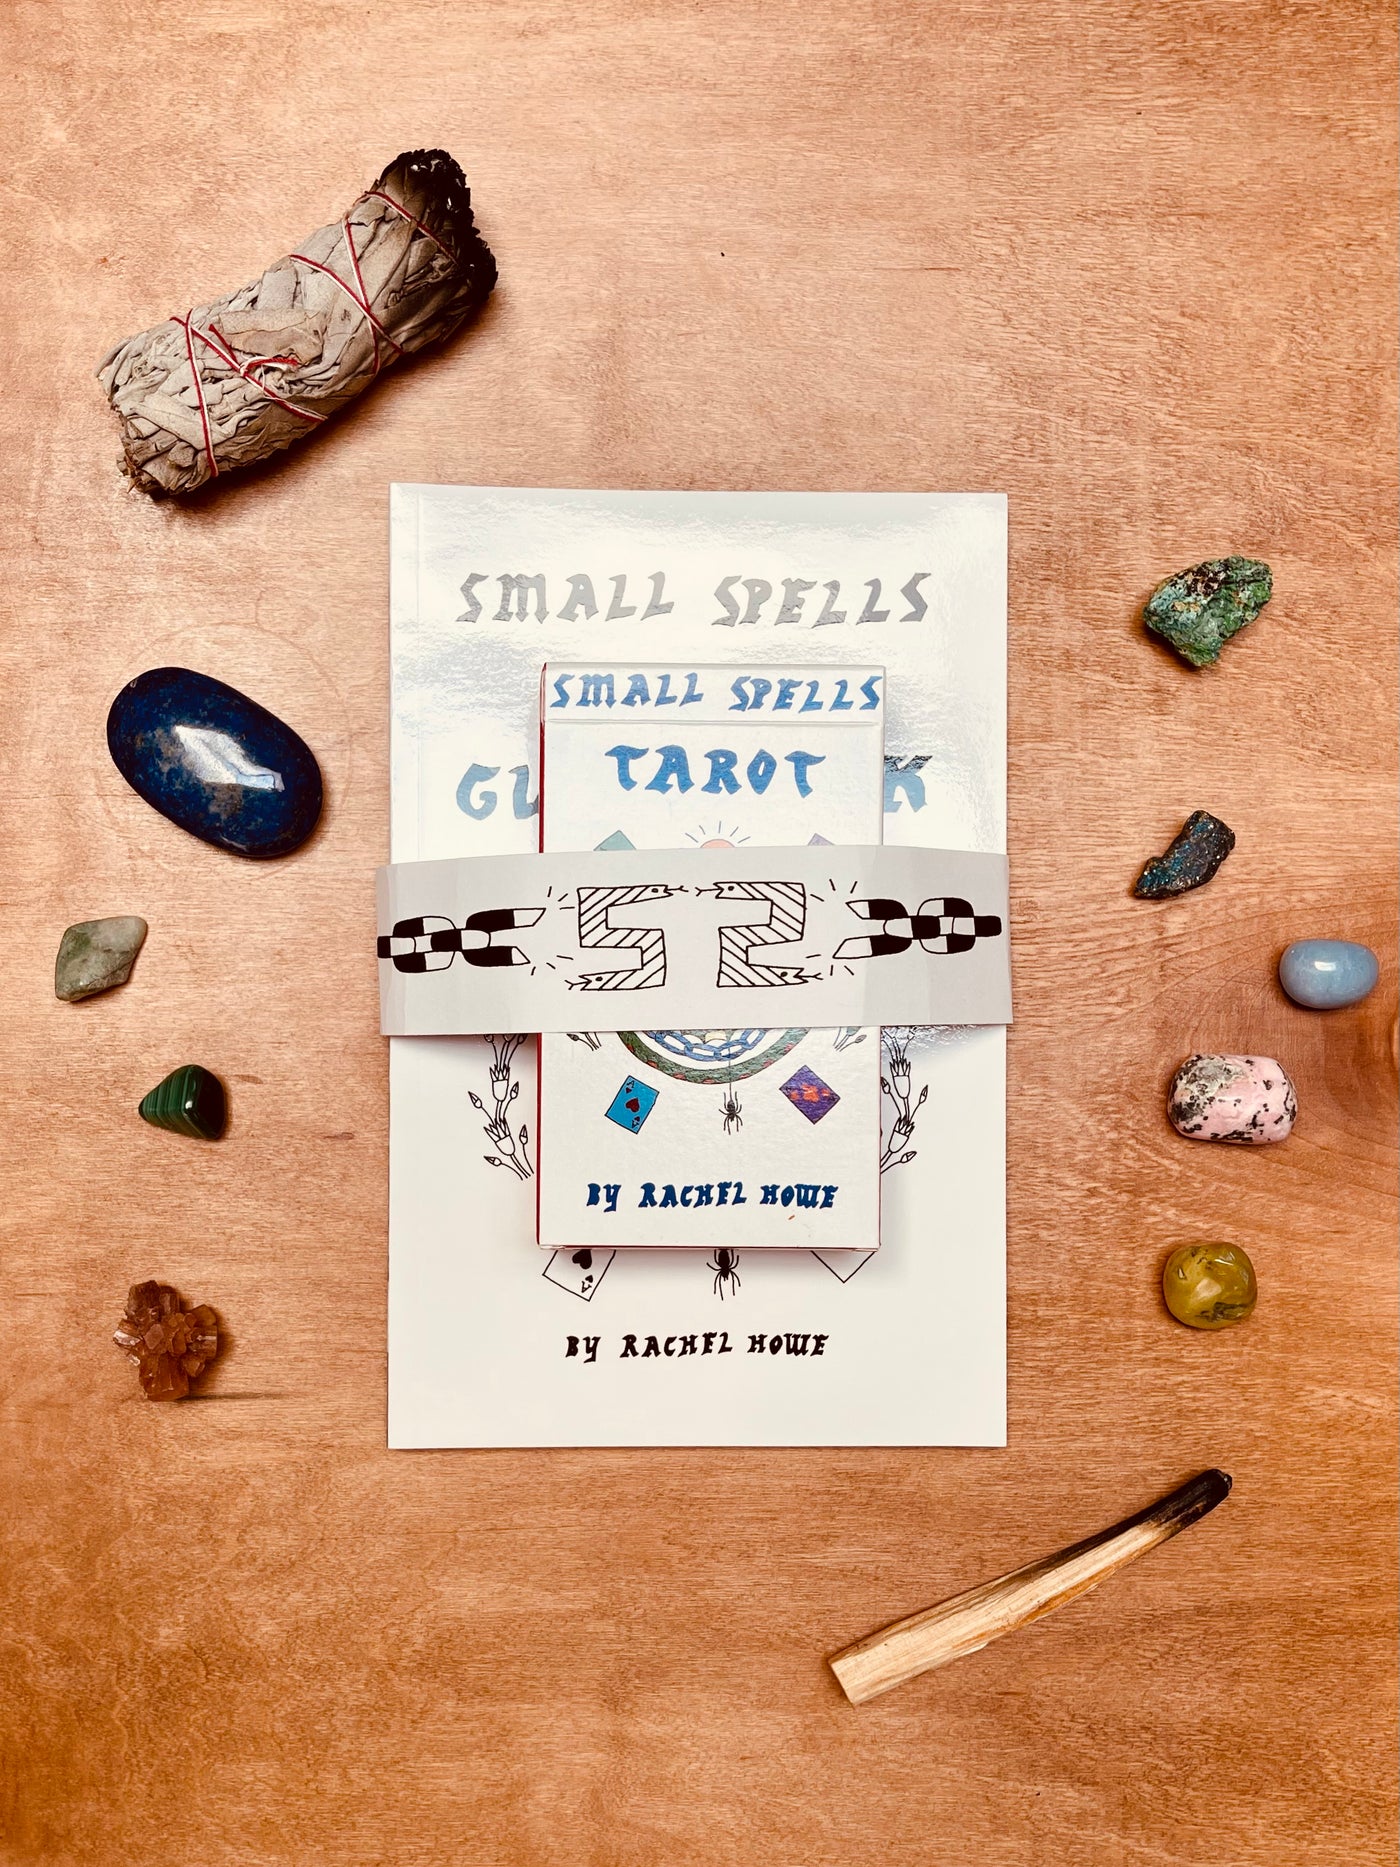 The Small Spells Color Tarot Deck includes all 78 cards of the Major and Minor Arcana and features illustrations that embrace mysticism while staying firmly rooted in the culture of modern design. The accompanying book contains reproductions of the drawings along with writing about the corresponding meanings from creator Rachel Howe’s perspective, which pulls from tradition as well as her own investigations and intuitions.